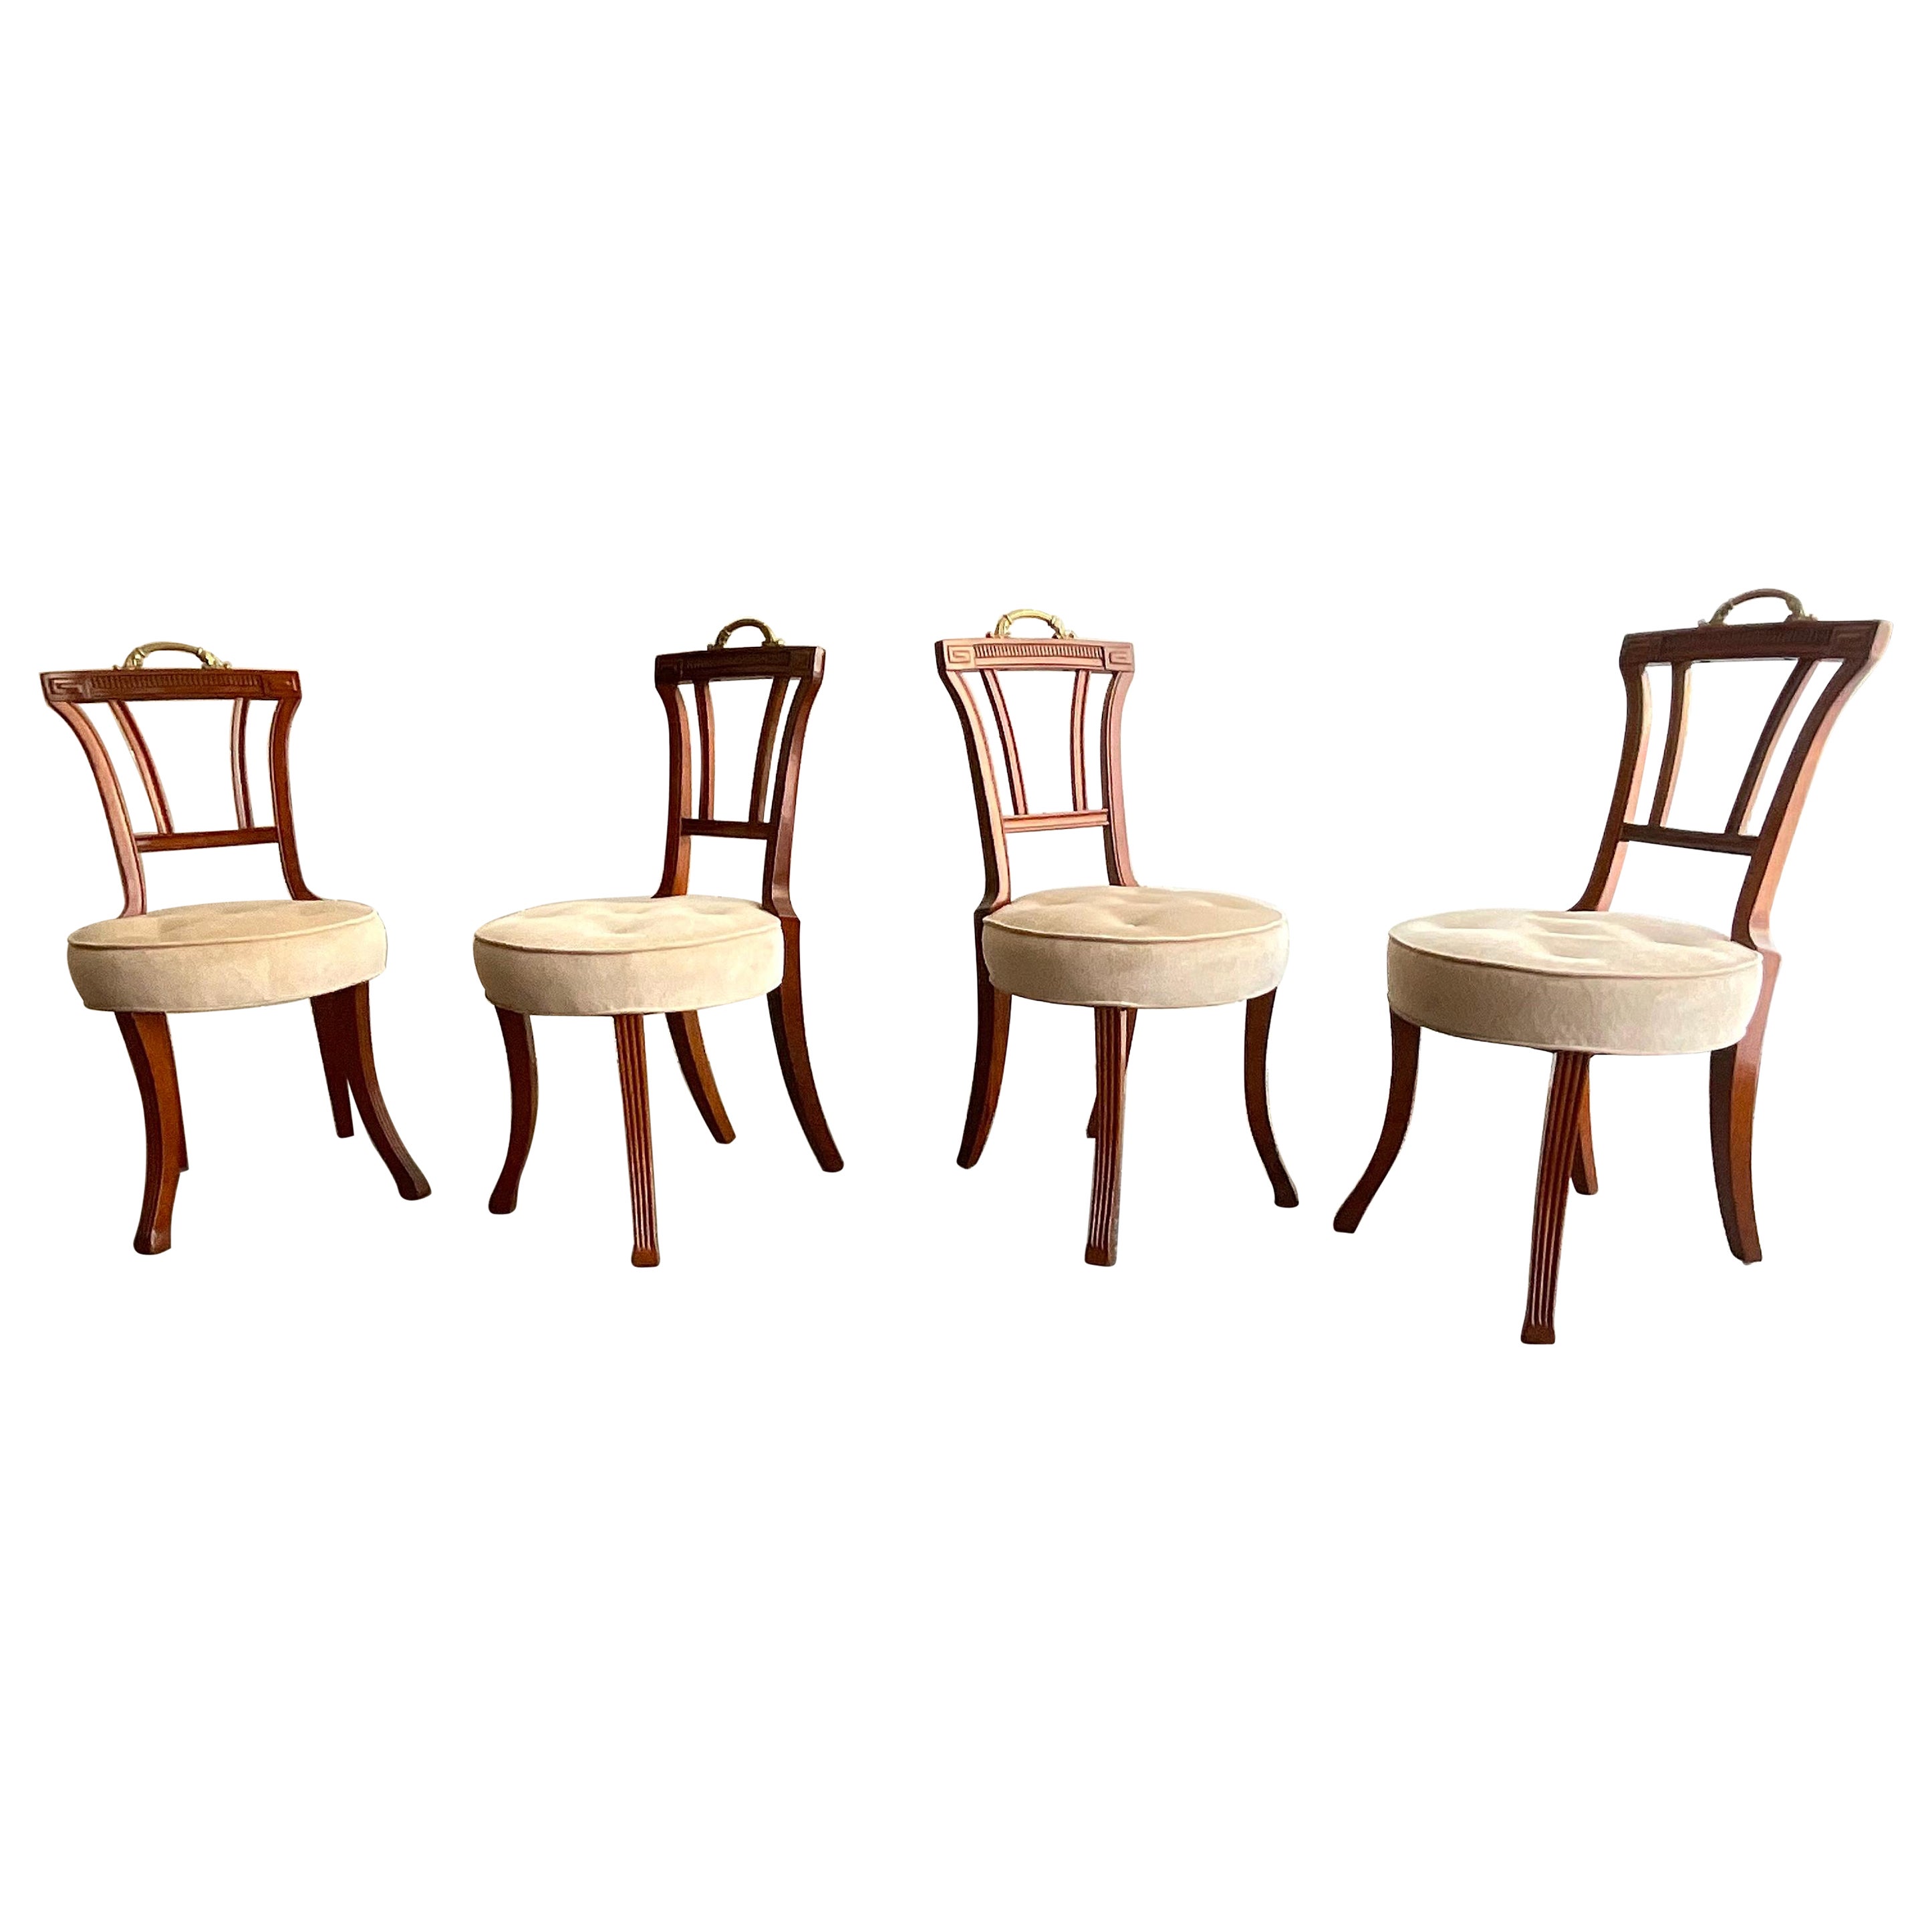 Antique Set of Four Carved Mahogany Grosfeld House Dining Chairs, 1940s For Sale